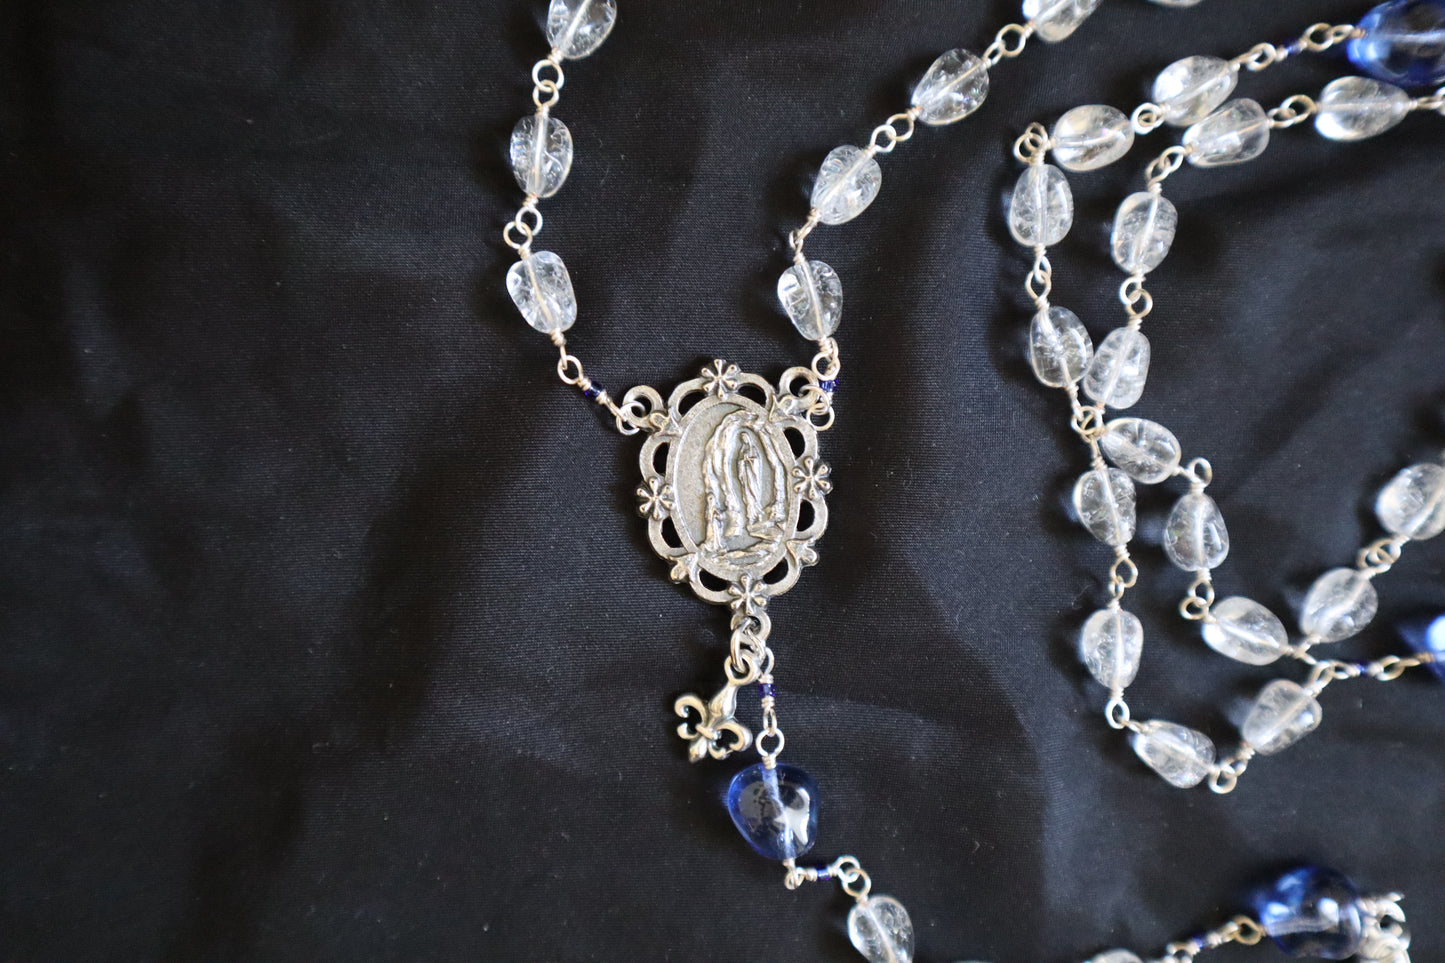 Our Lady of Lourdes Rosary